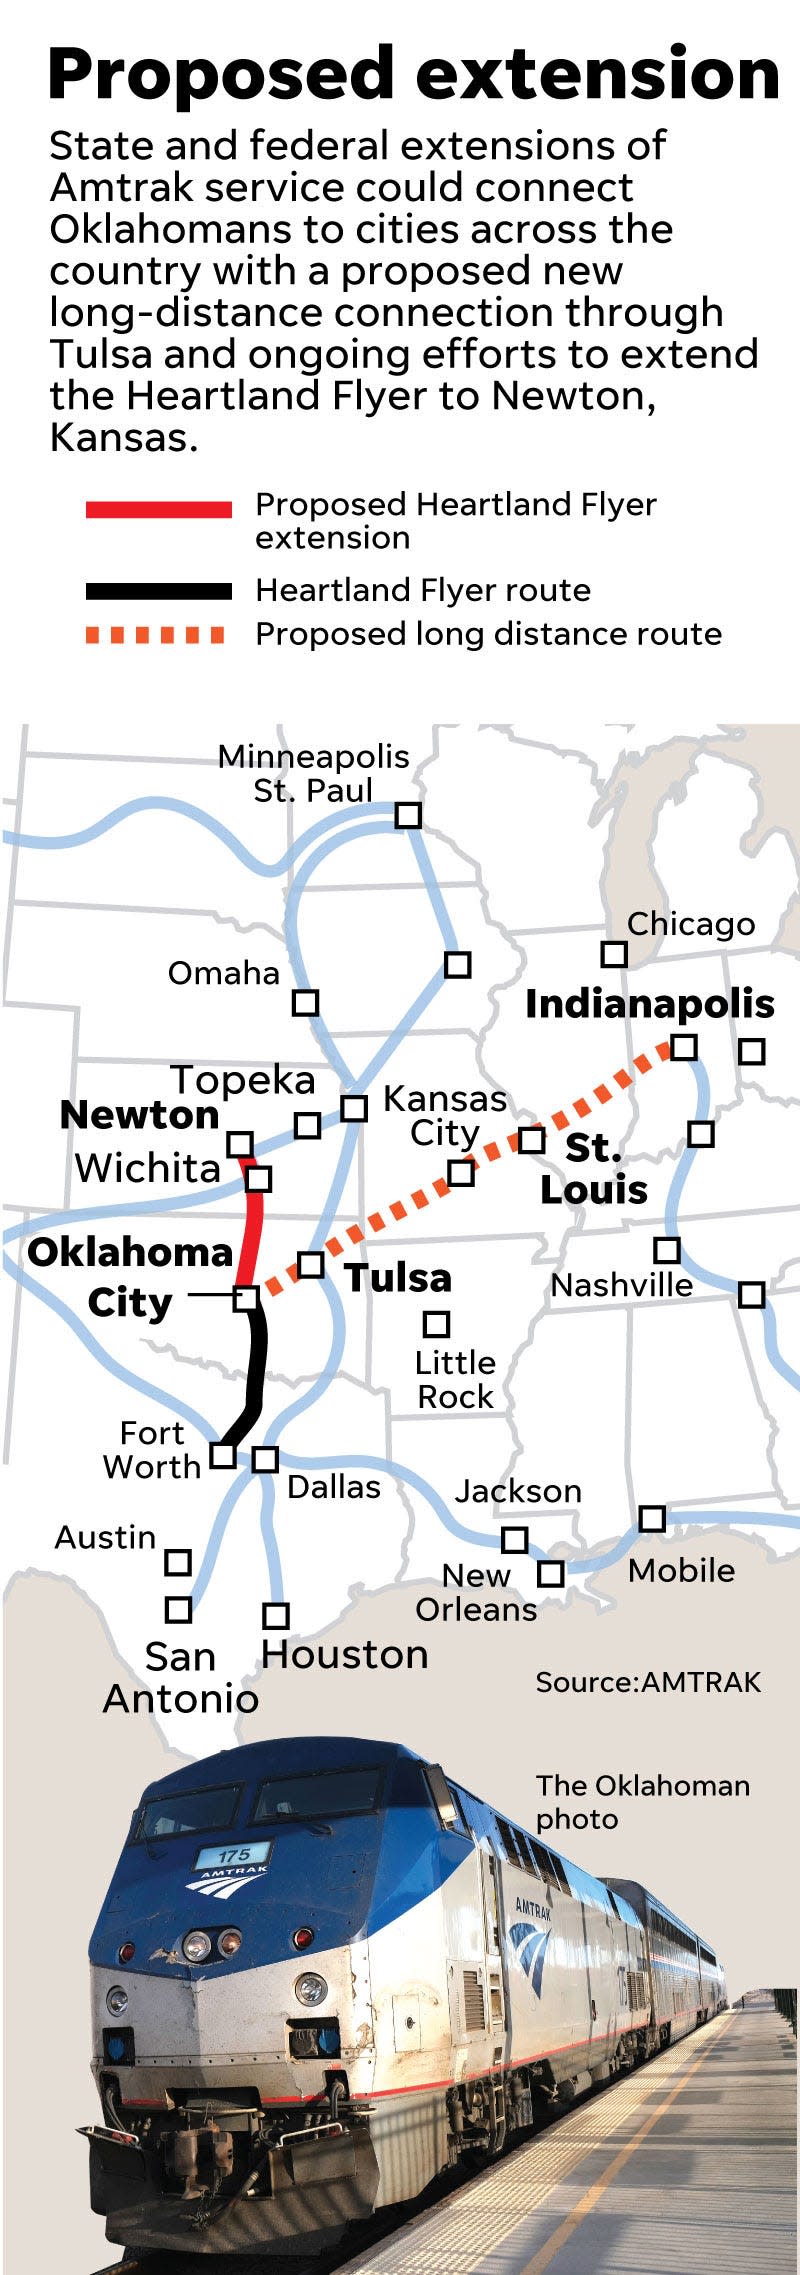 Map showing possible connections should Amtrak expand passenger services in Oklahoma.